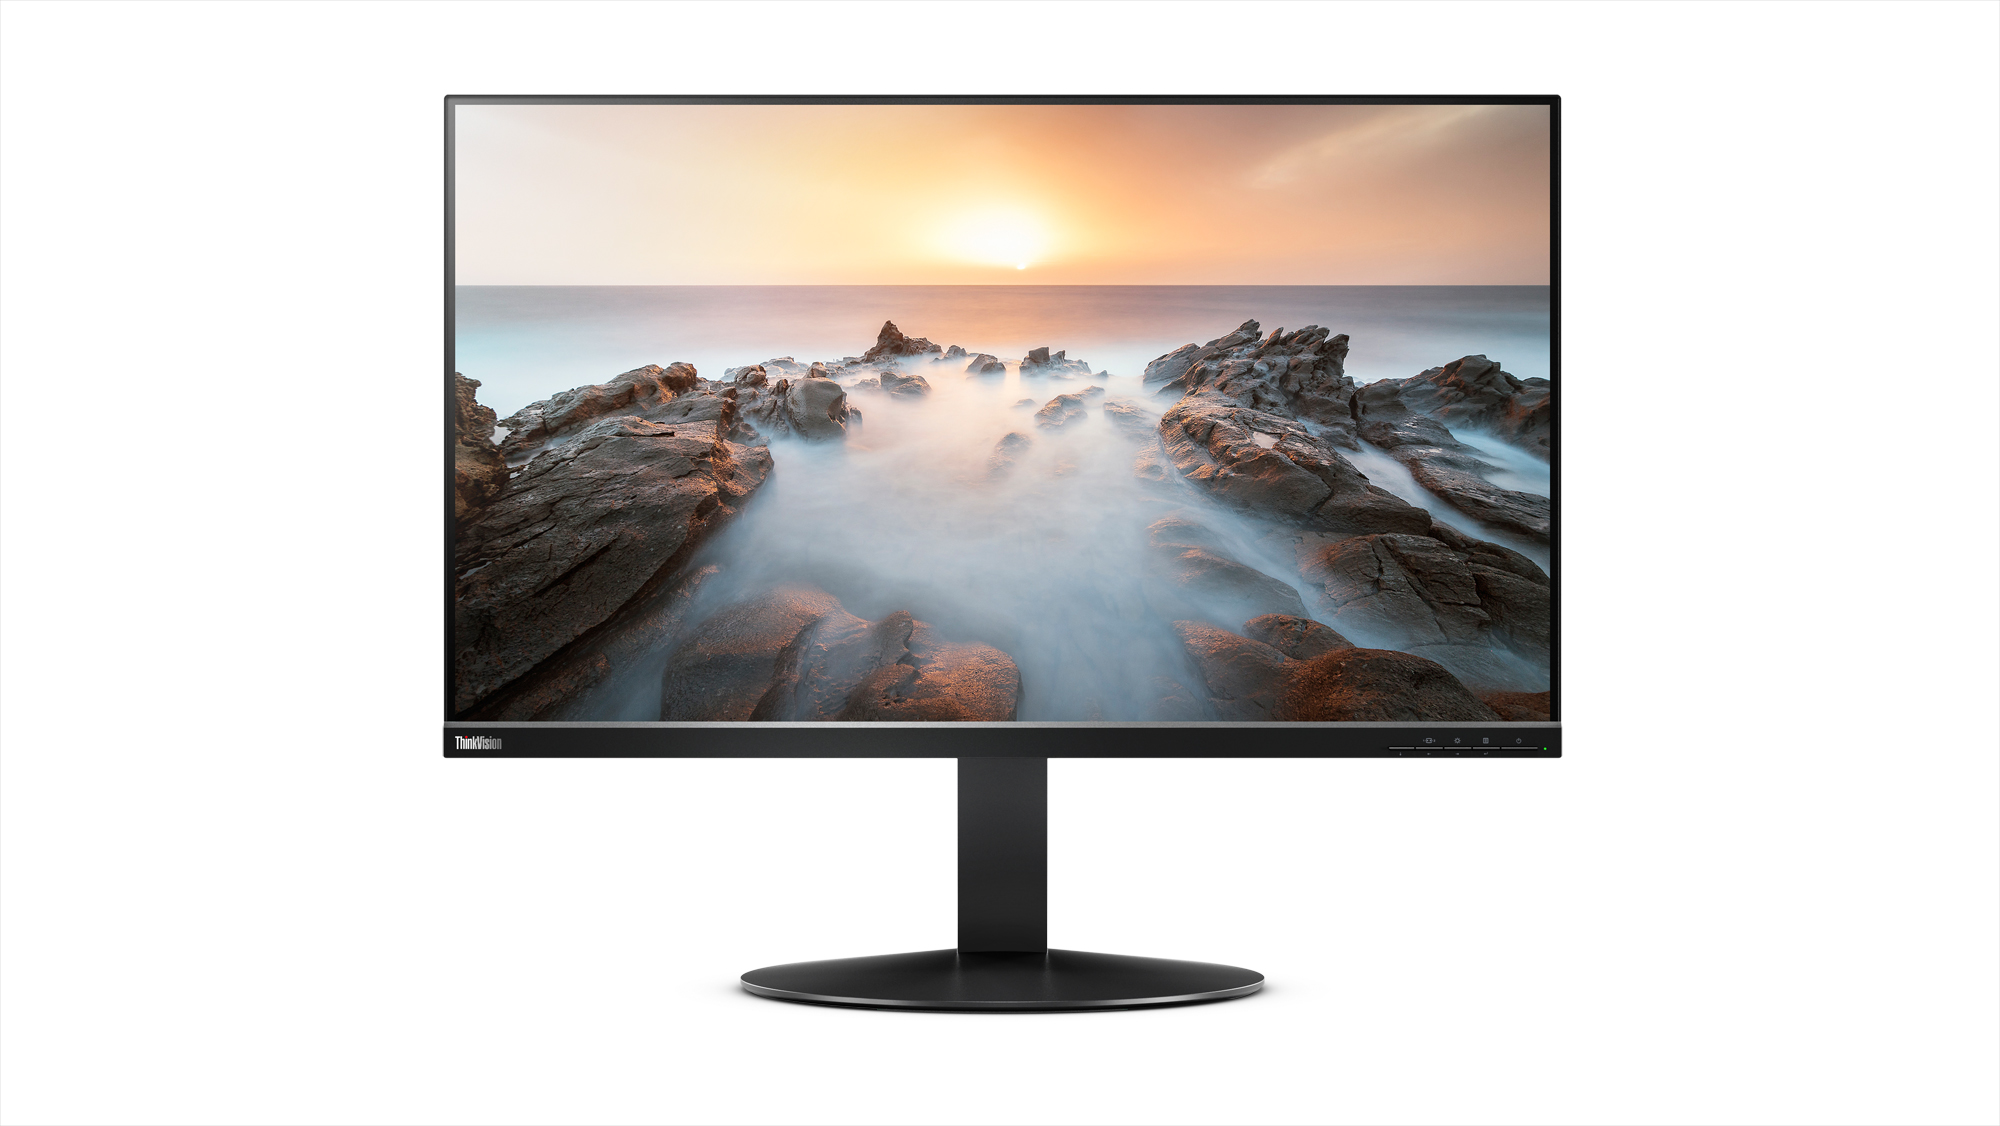 When color accuracy matters, the ThinkVision P32u is the monitor you need.